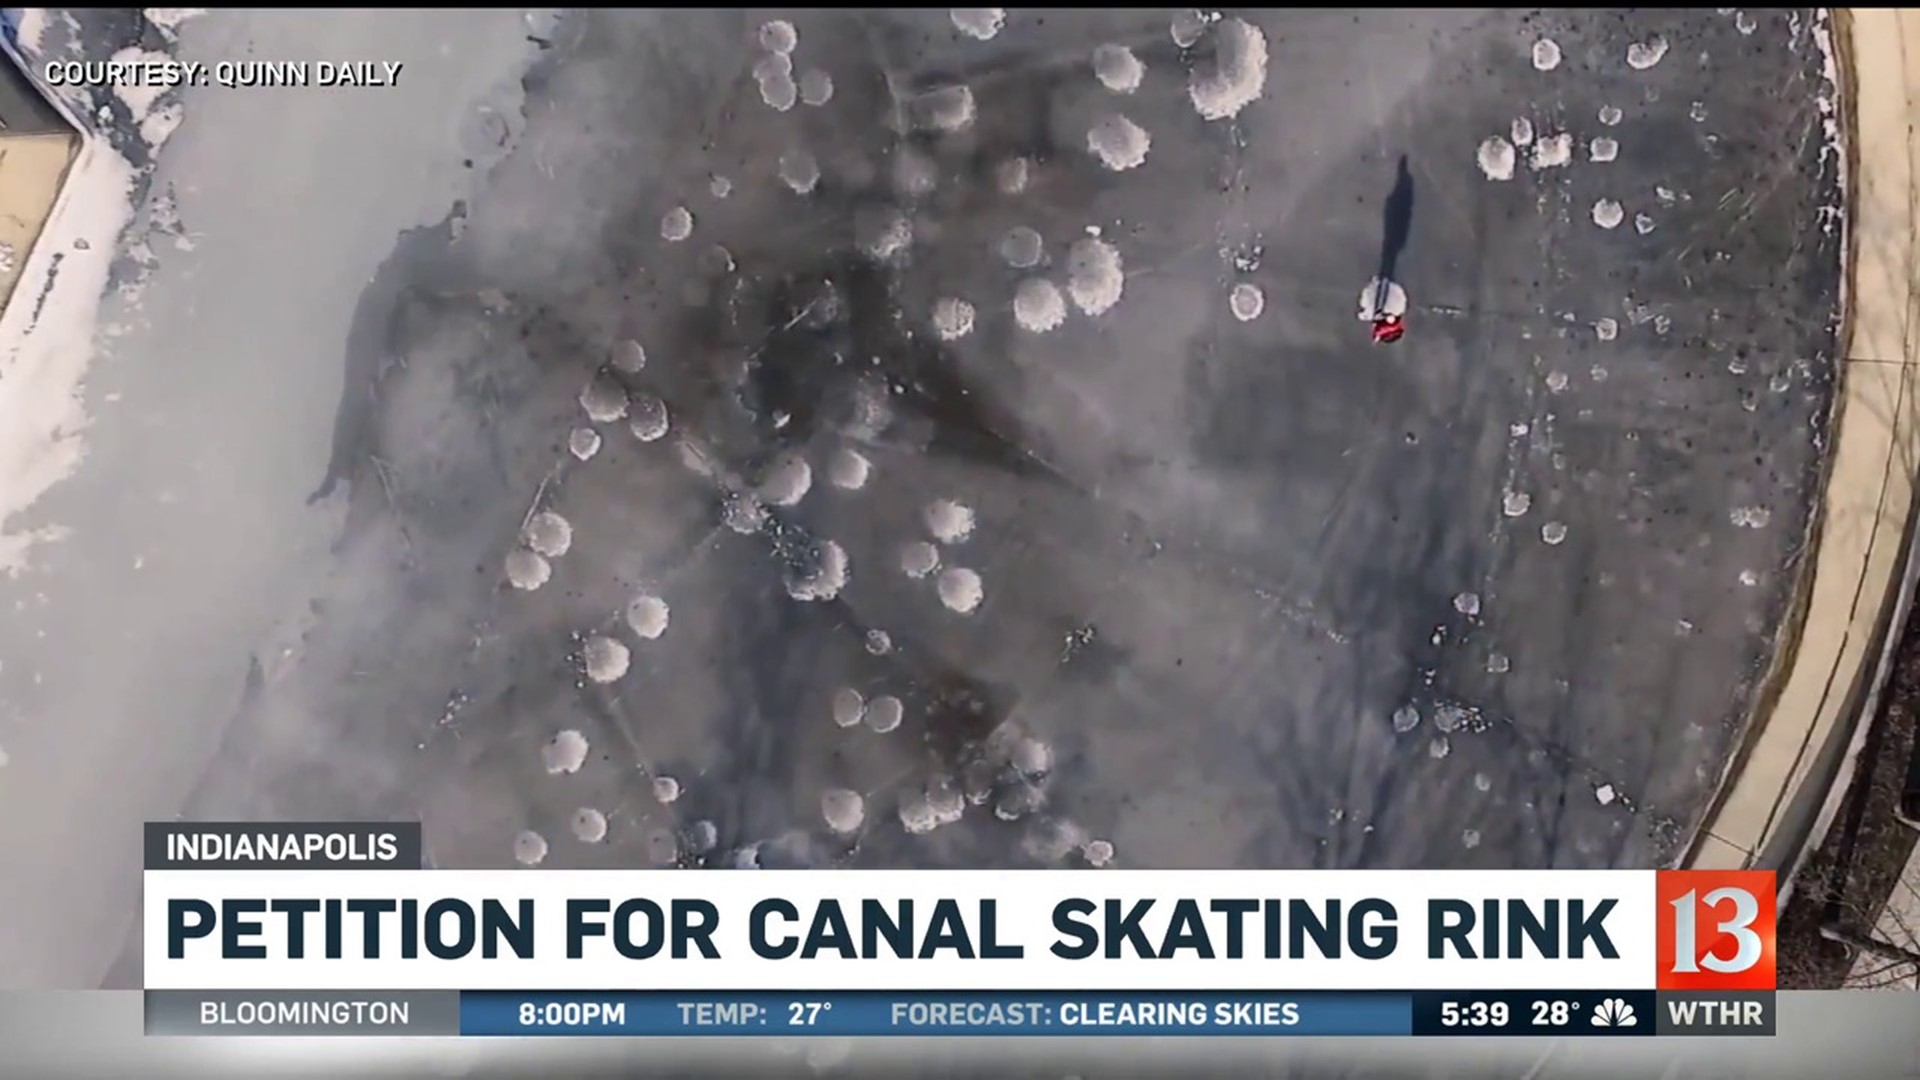 Canal skating petition